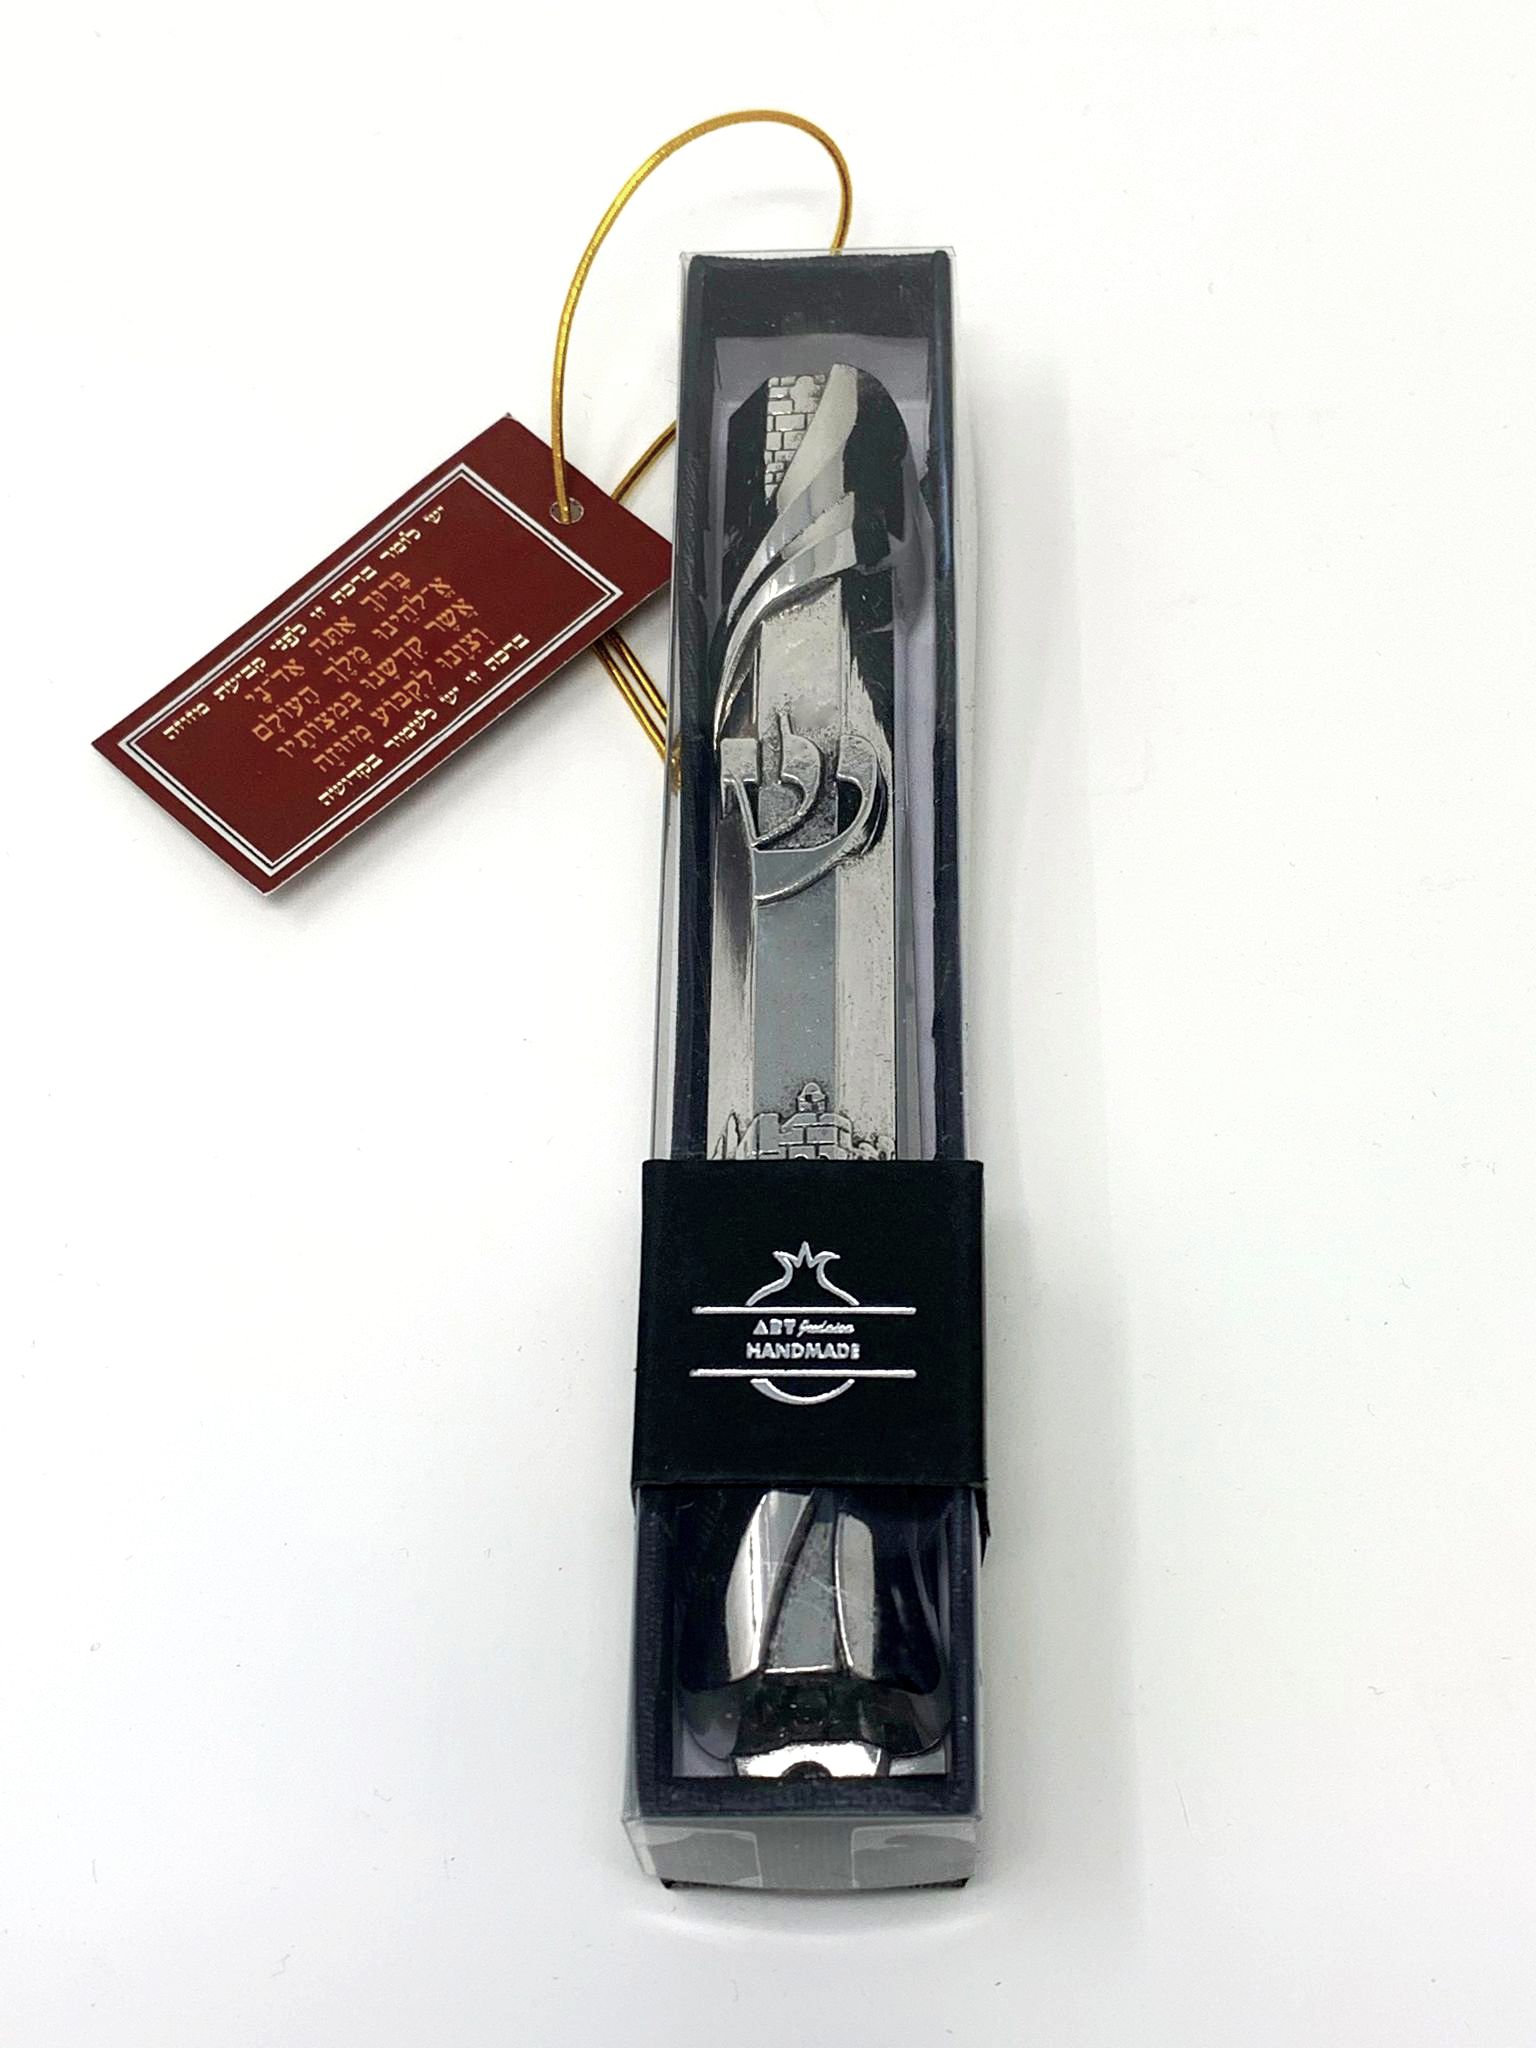 Mezuzah Case - Metal Silver-Tone Jewish  Blessing for Home Old City Design, 6"